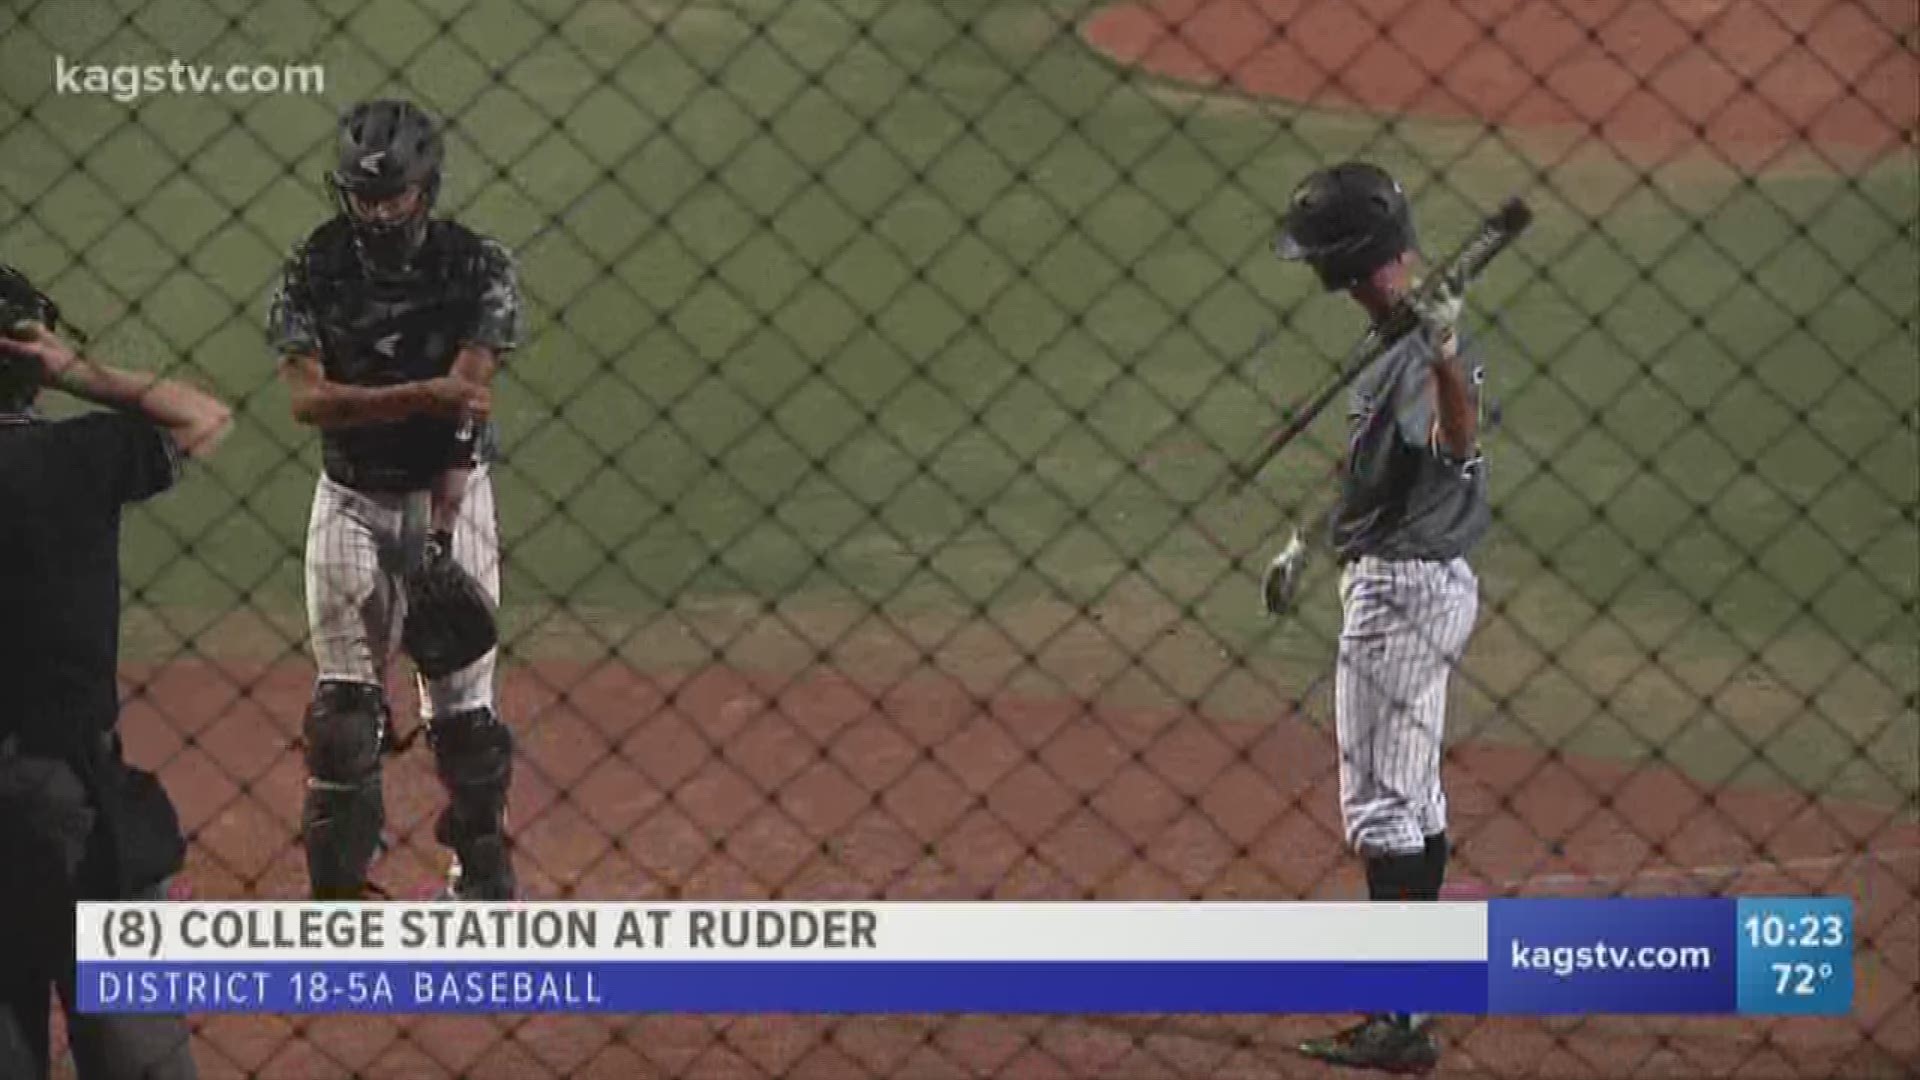 Behind a dominant performance from Travis Hester, College Station defeated Rudder 4-2 on Tuesday.